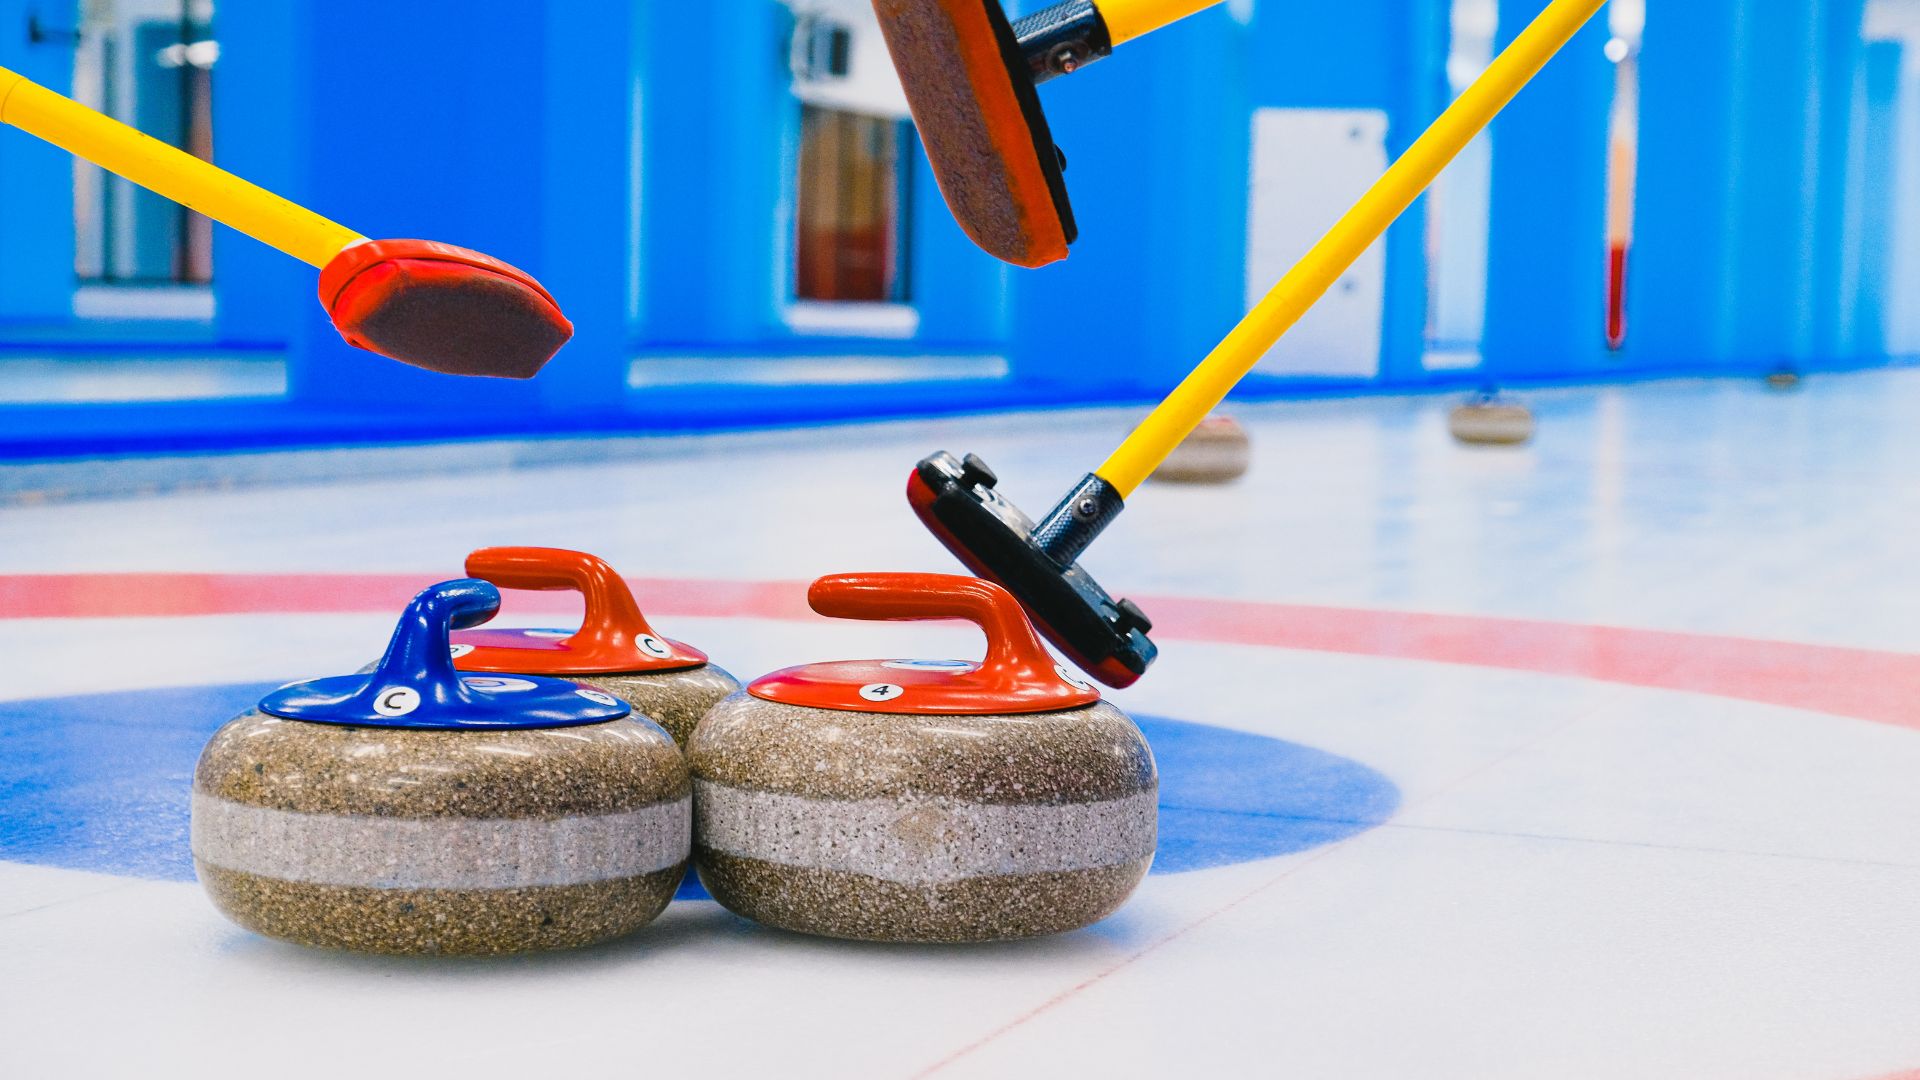 Olympic curling stones_mimaed